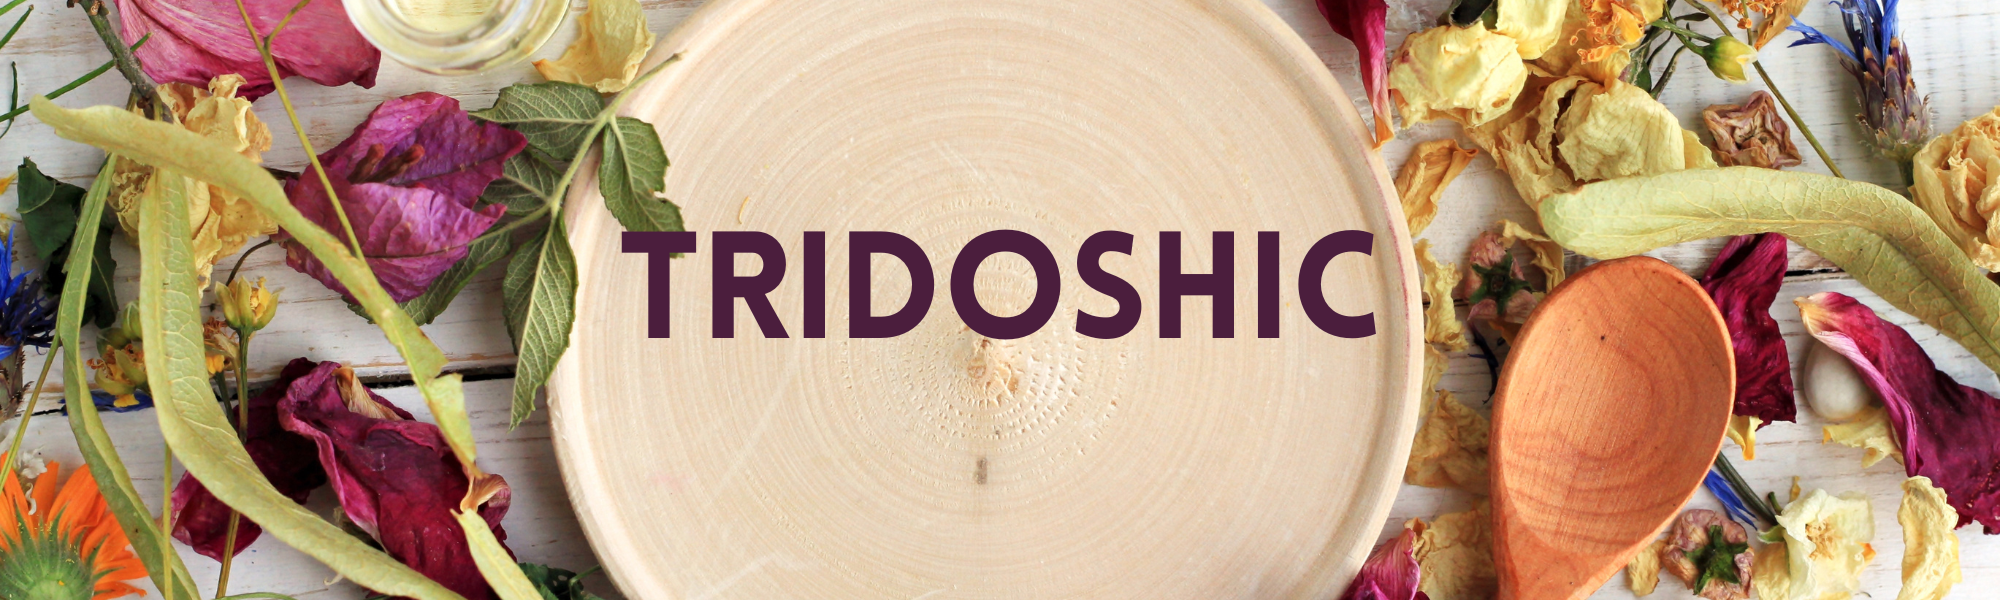 Tridoshic Suggested Products